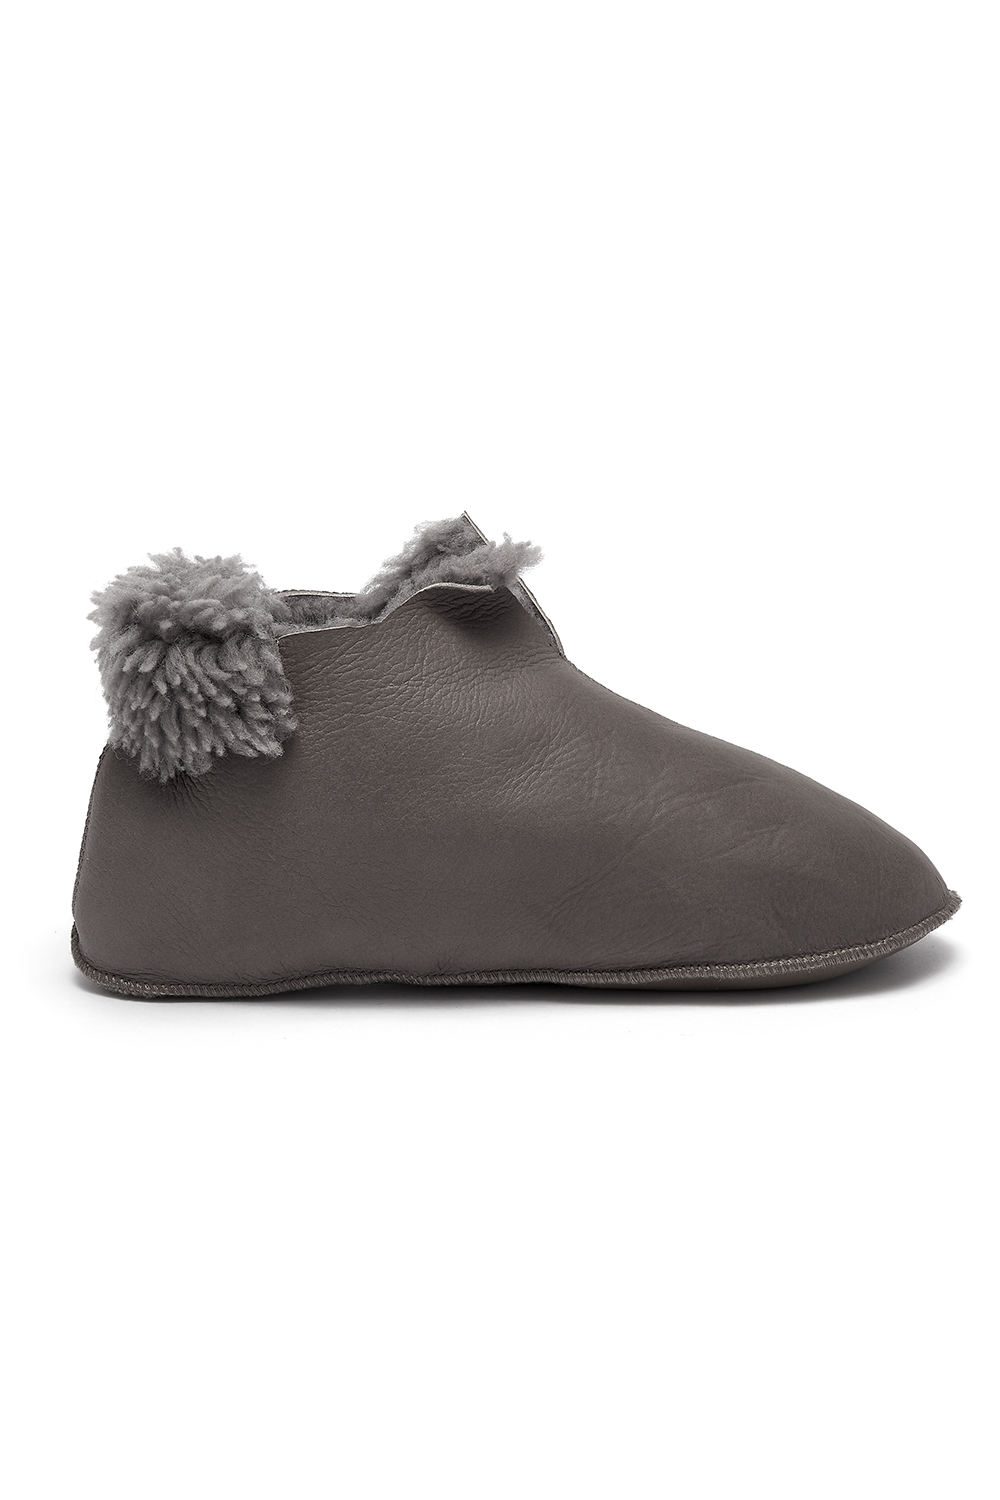 Gushlow & Cole Teddy Shearling Slipper Boots-Taupe